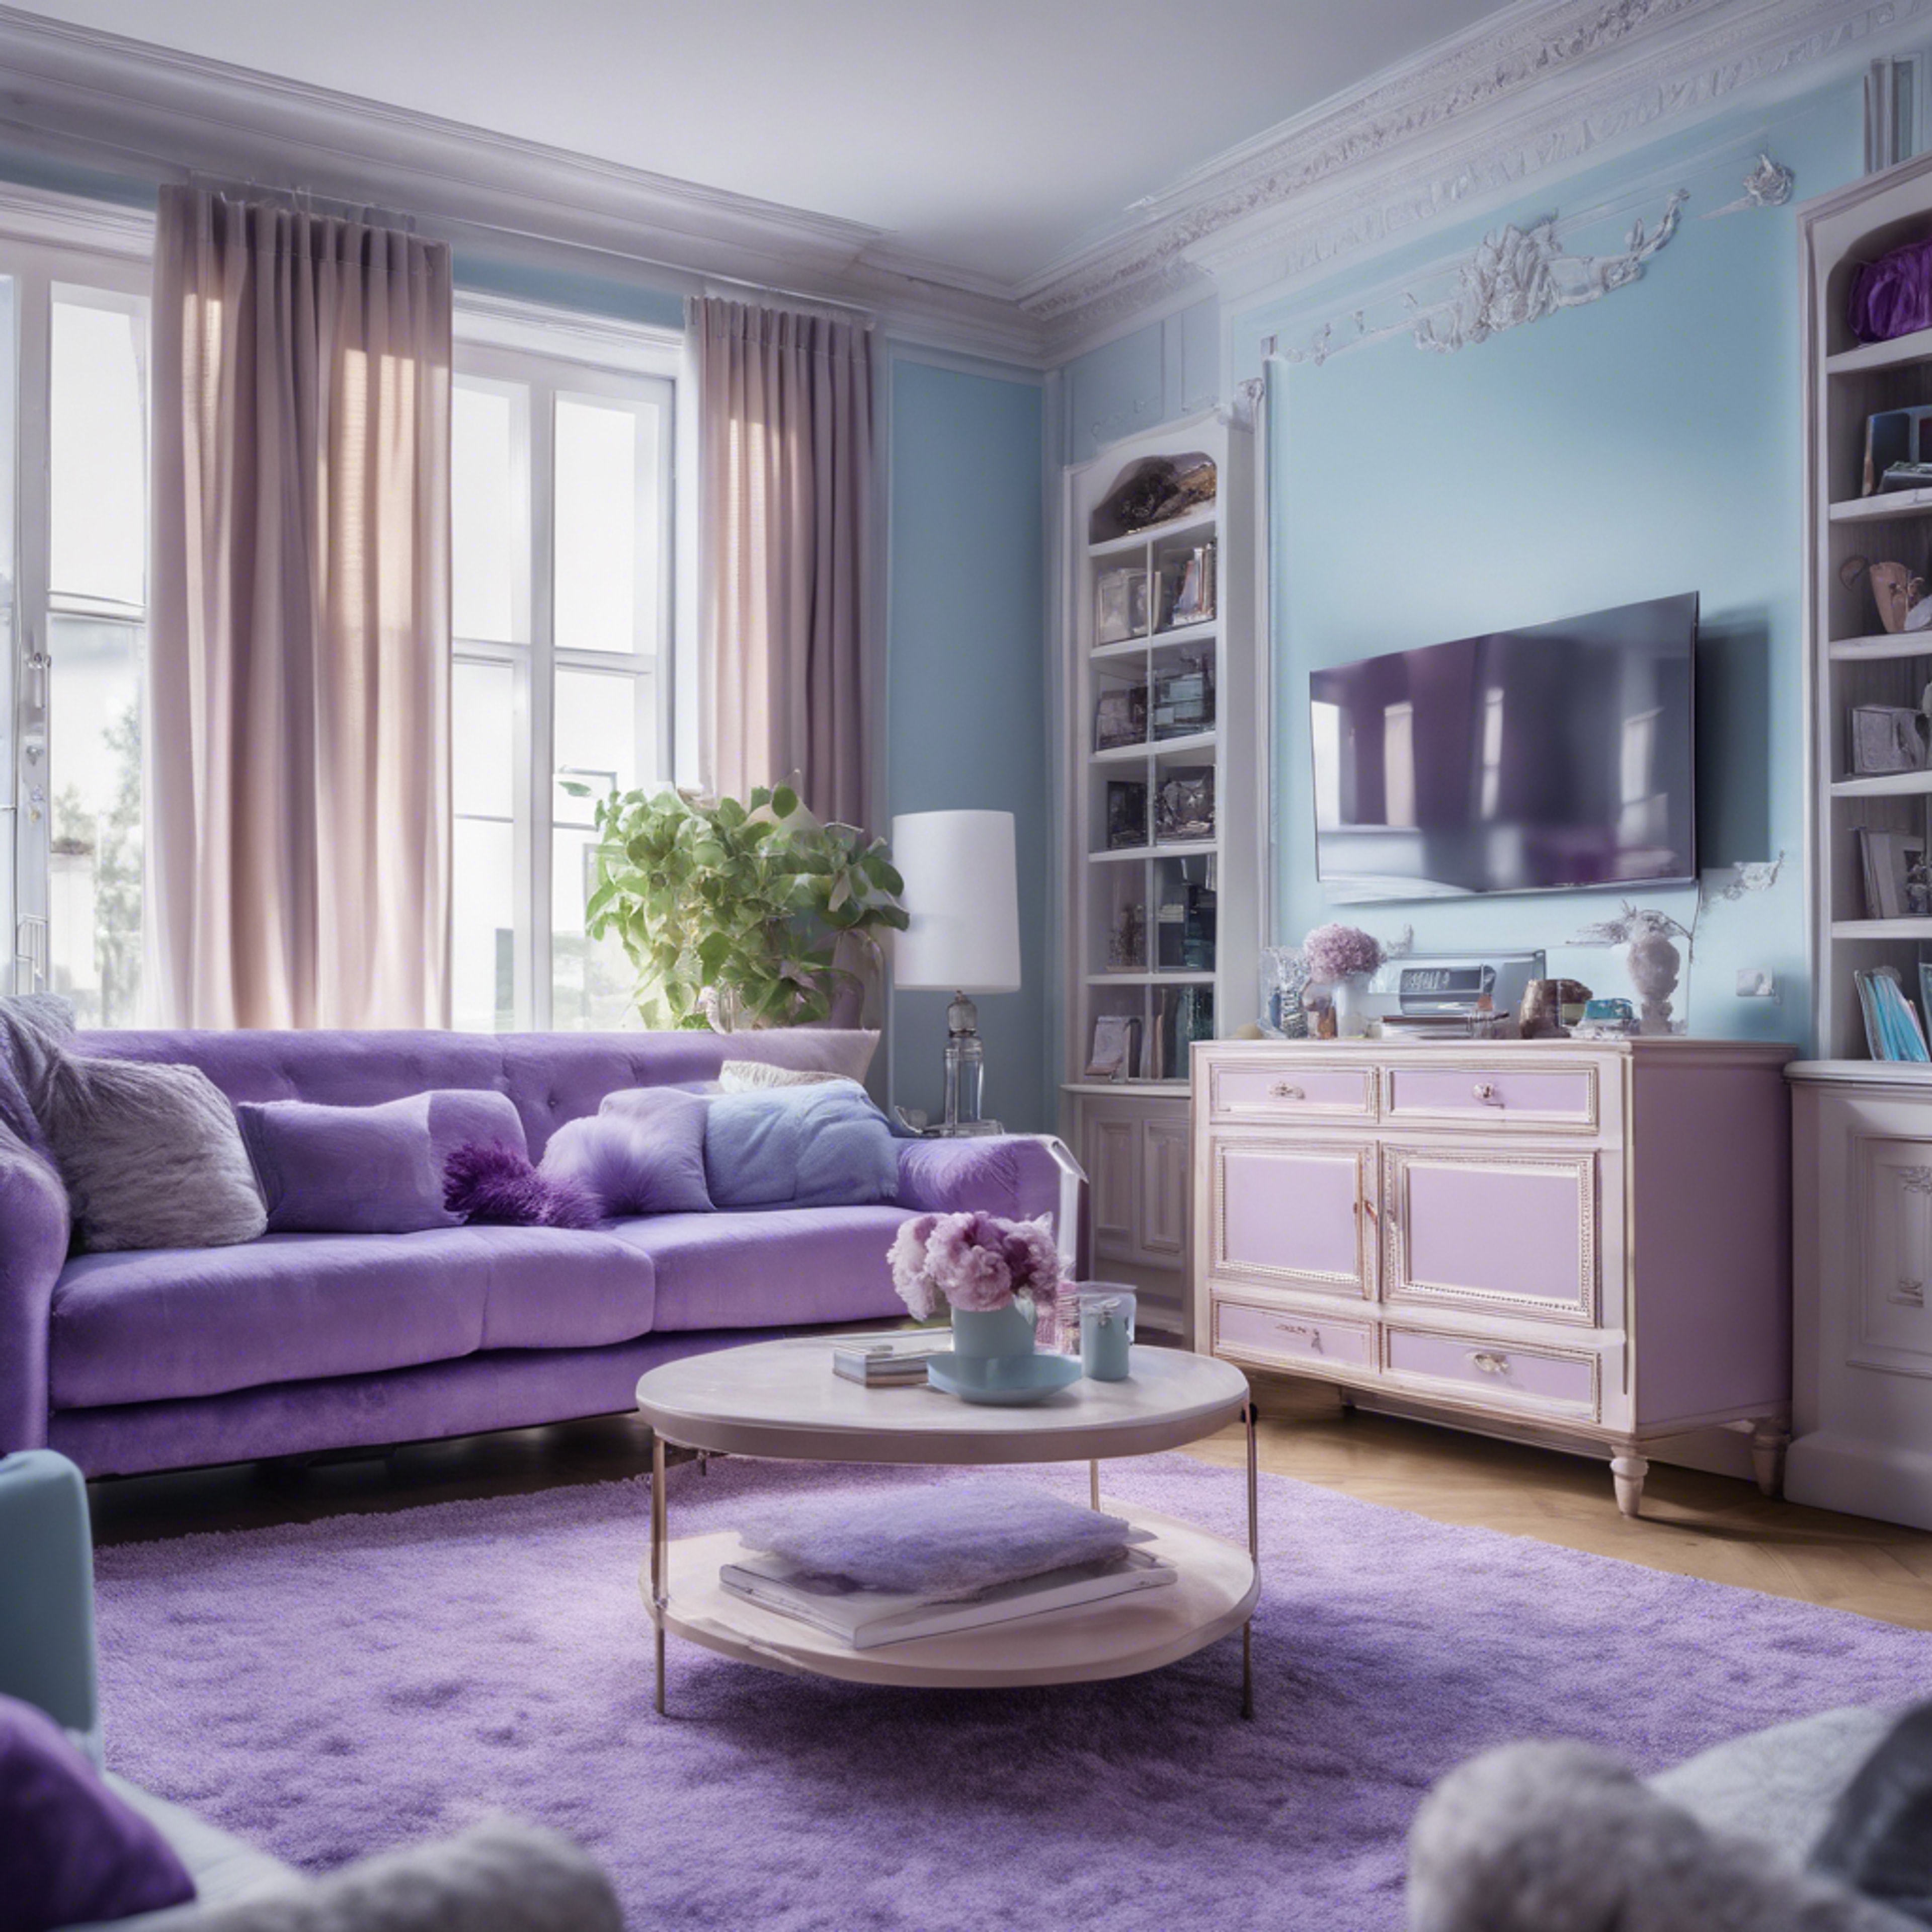 A preppy pale blue and purple themed living room with plush furnishings.壁紙[1c55319af0b34b75a0be]